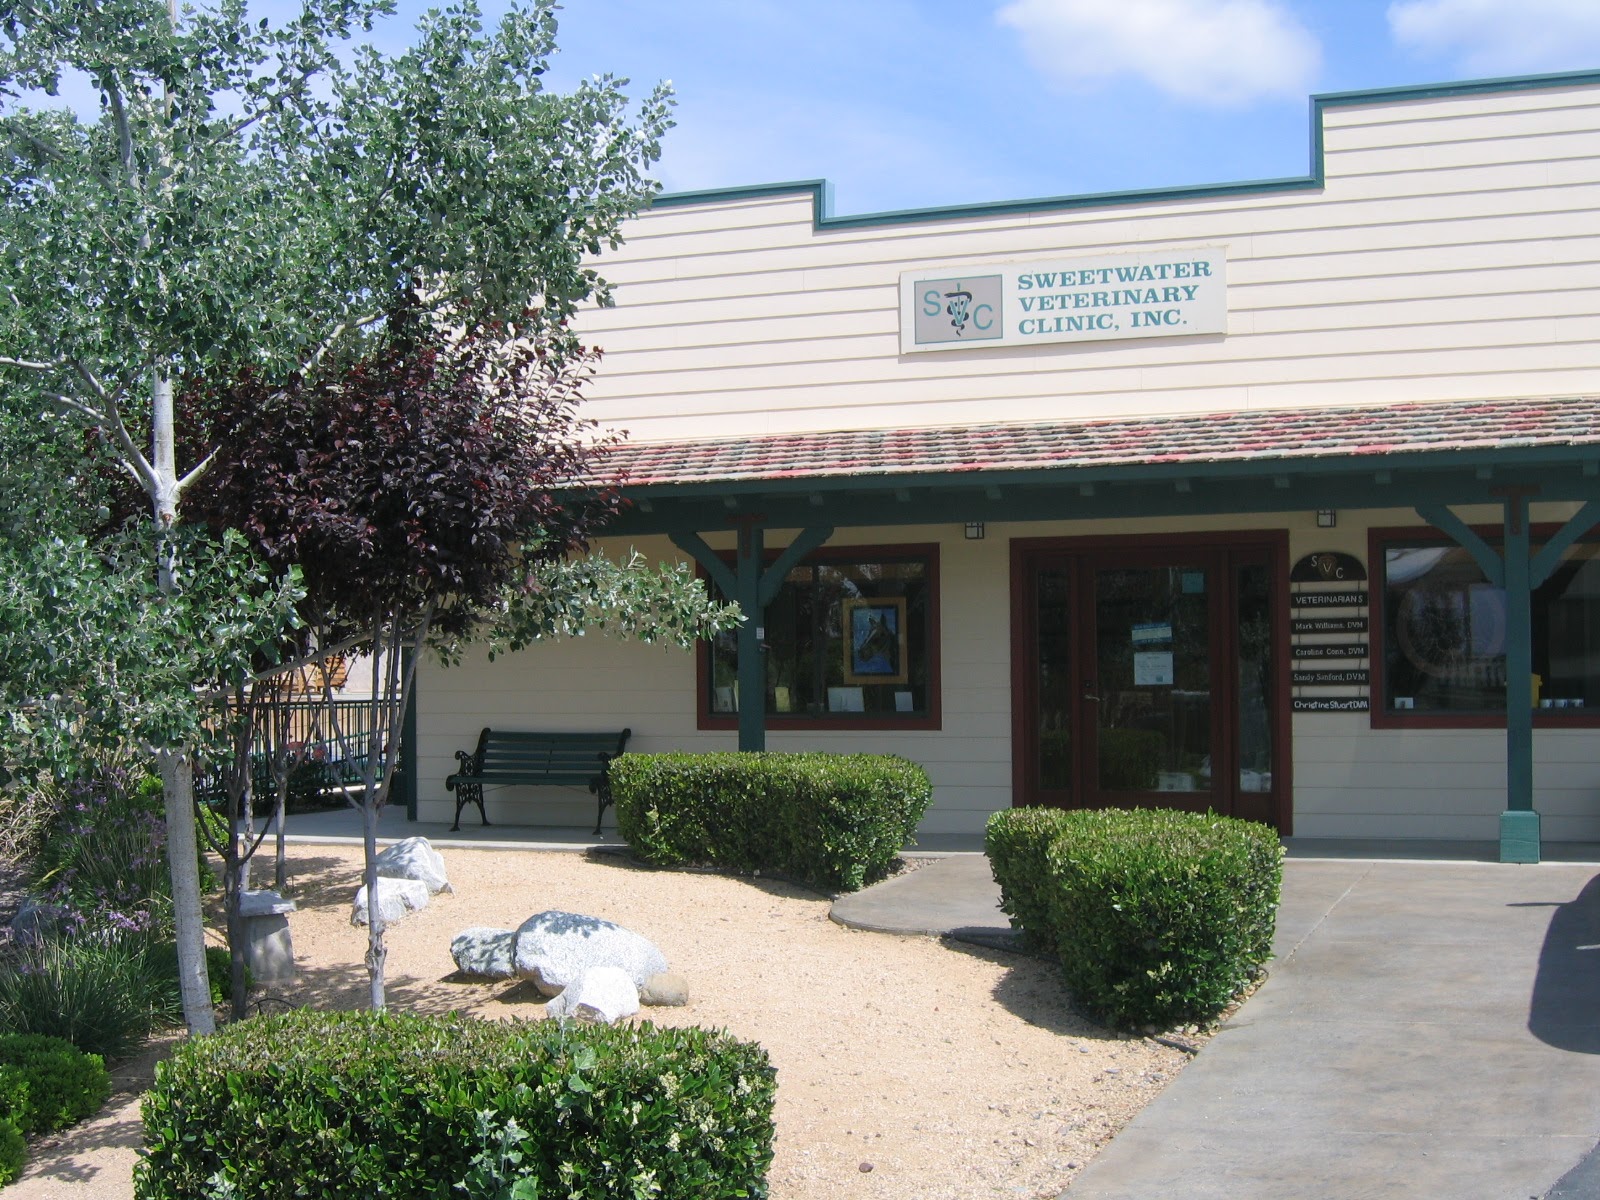 Sweetwater Veterinary Clinic